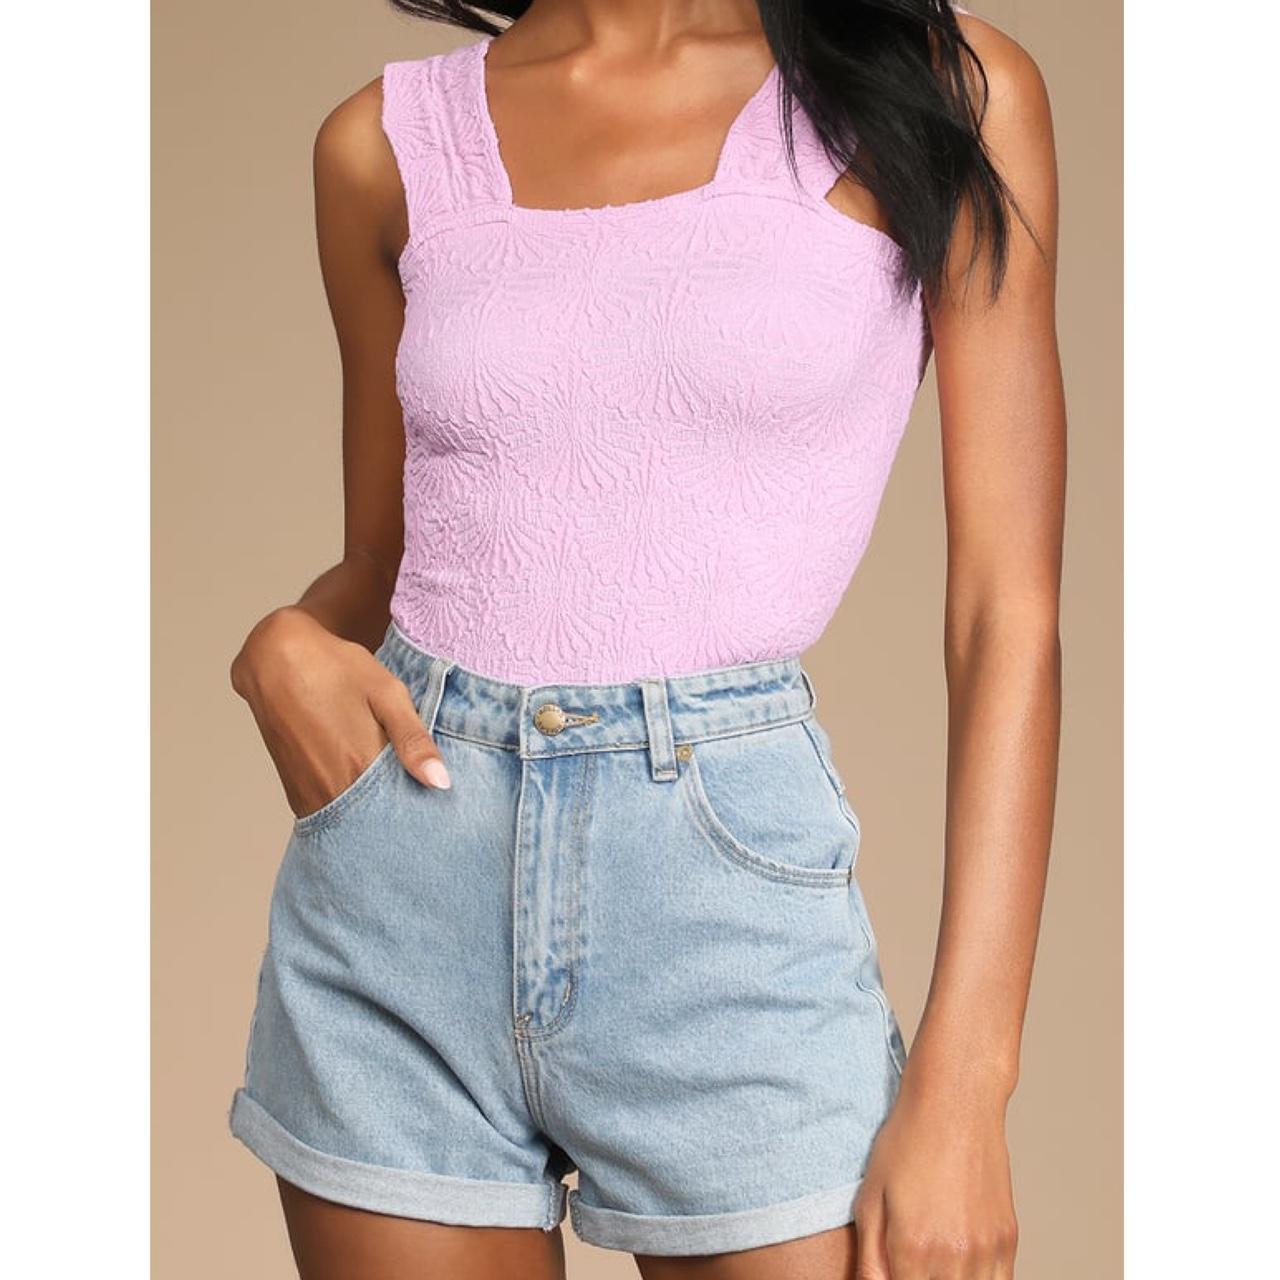 Free People Love Letter Cropped Cami Tank Top - Women's Tank